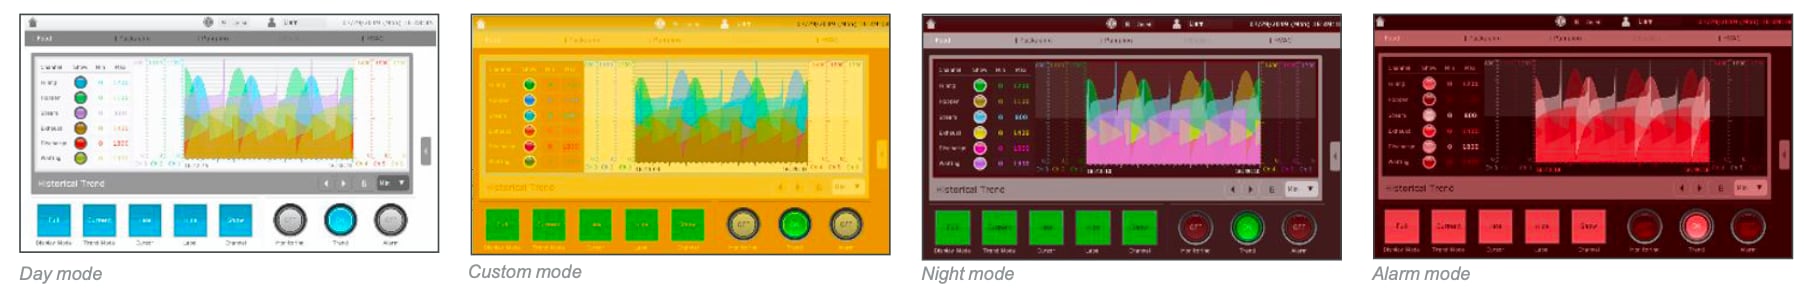 HMI ST6 theme and colors